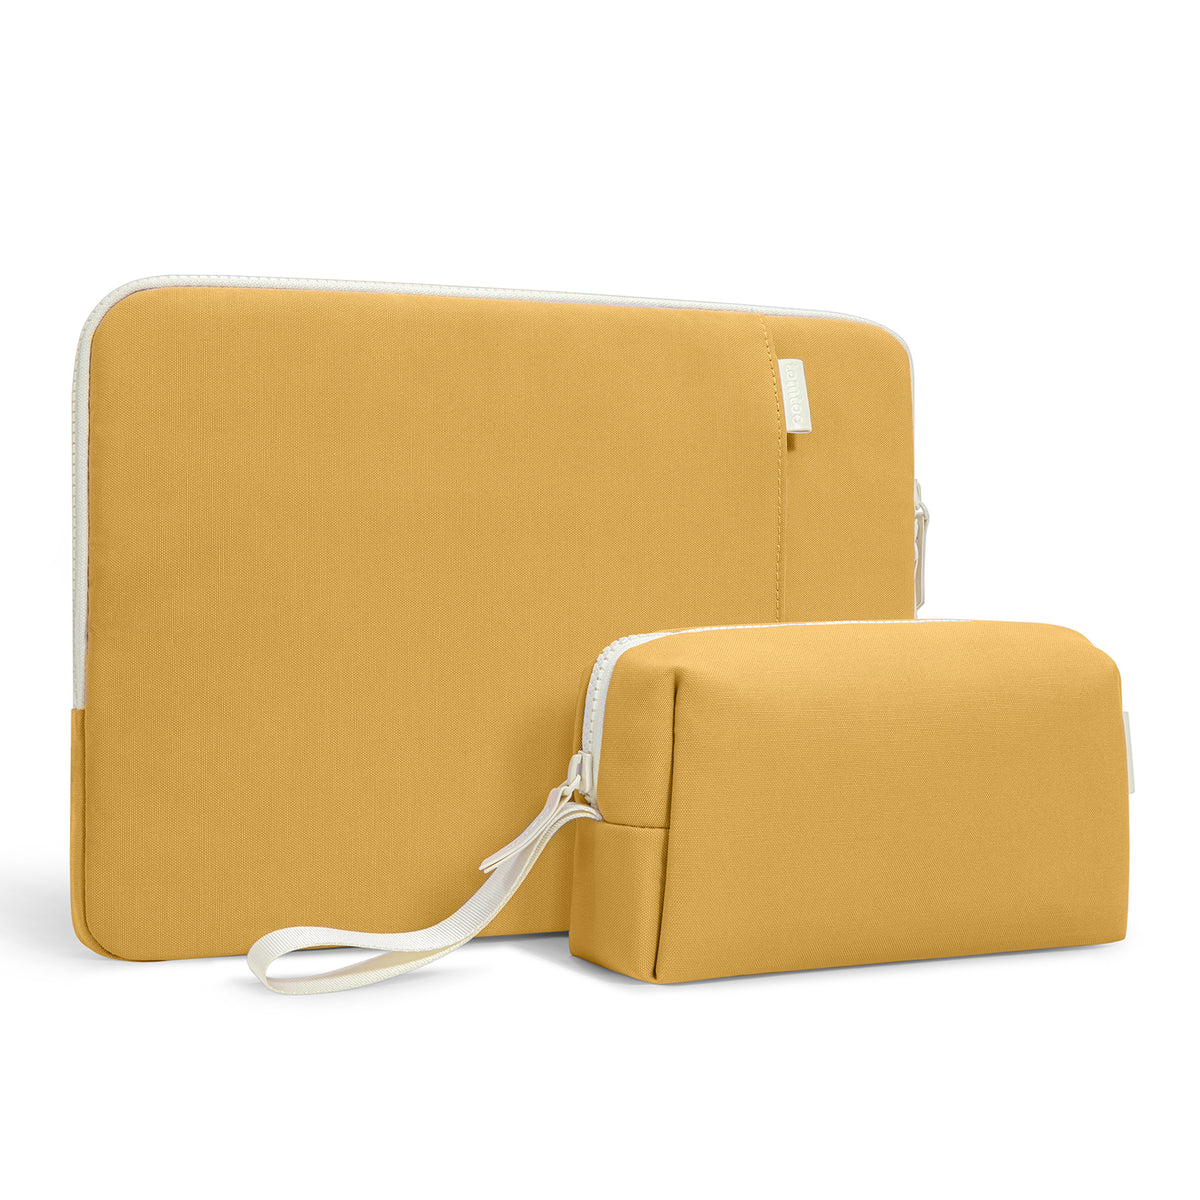 Defender-A23 Jelly Laptop Sleeve Kit for 13-inch MacBook Air M3/M2/M1 | Maize Yellow